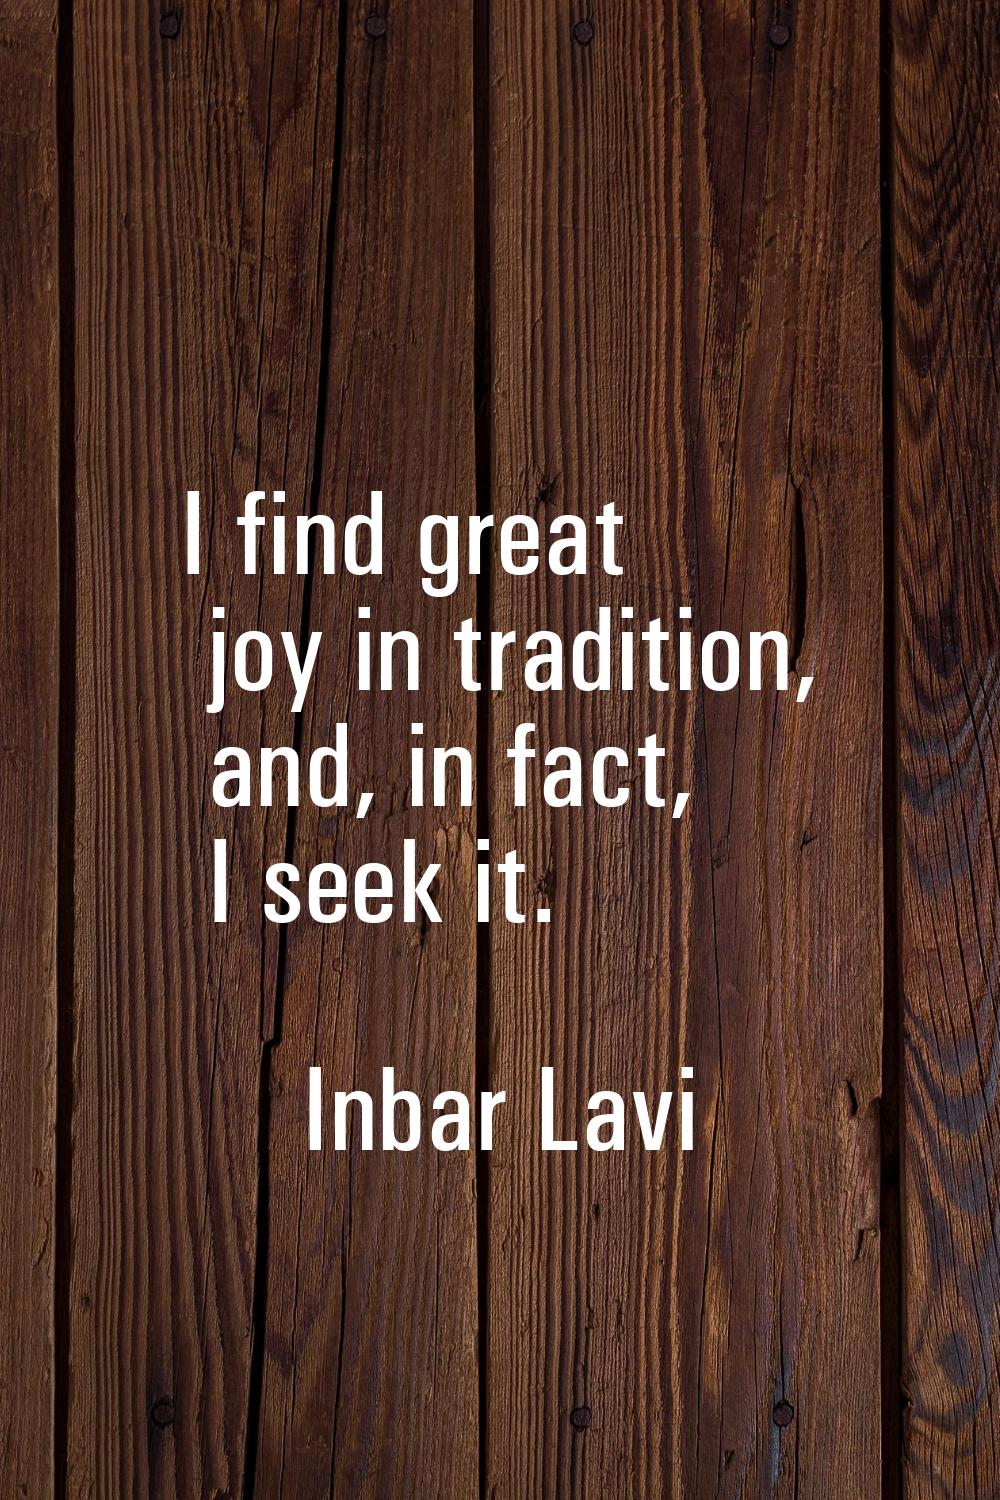 I find great joy in tradition, and, in fact, I seek it.